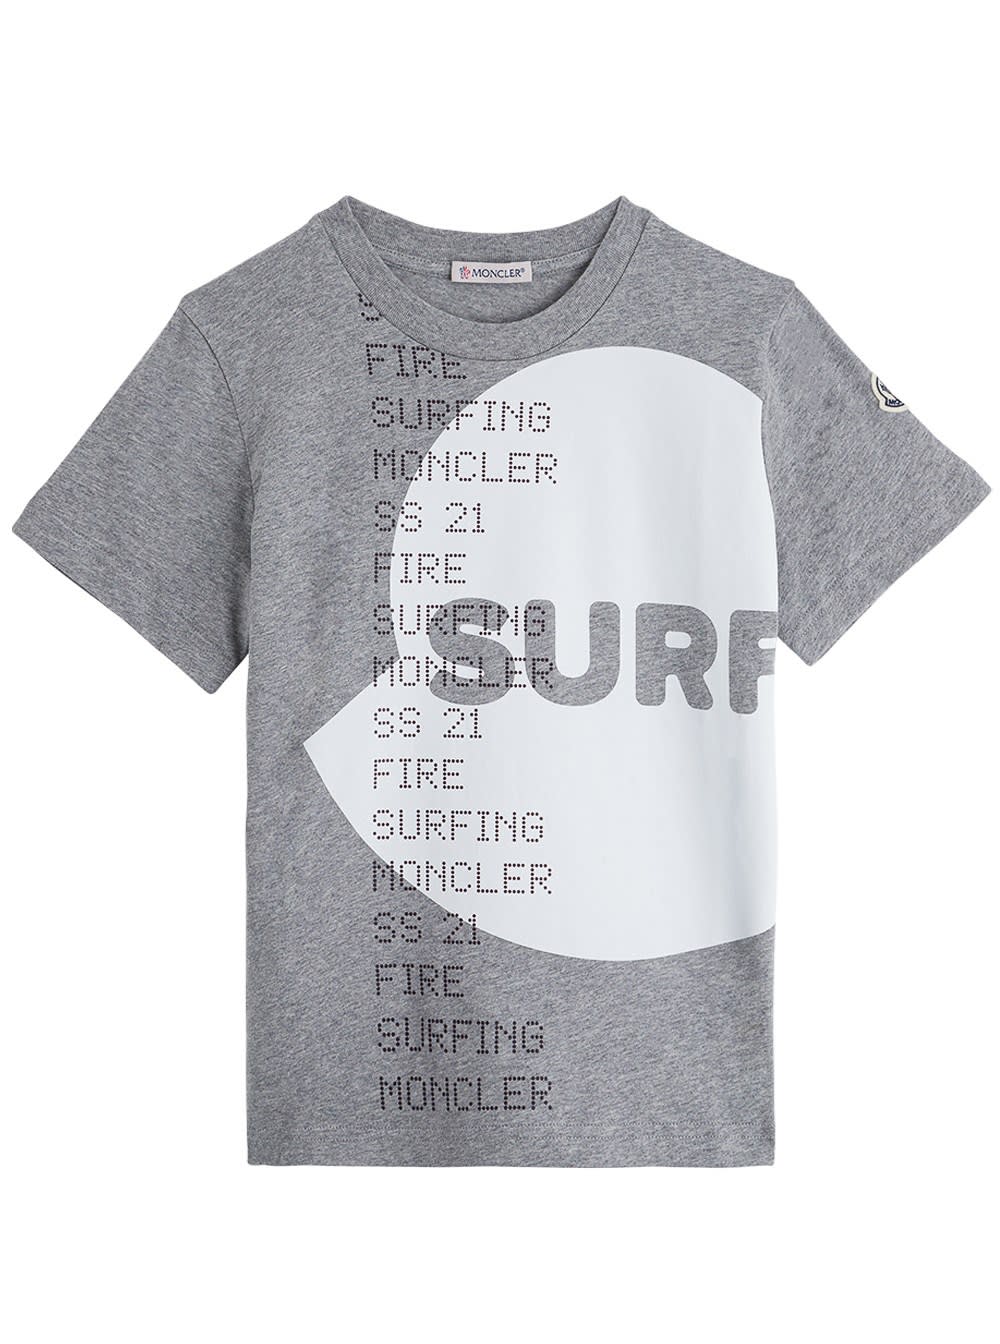 Moncler Kids' Gray Jersey T-shirt With Print In Grigio/bianco